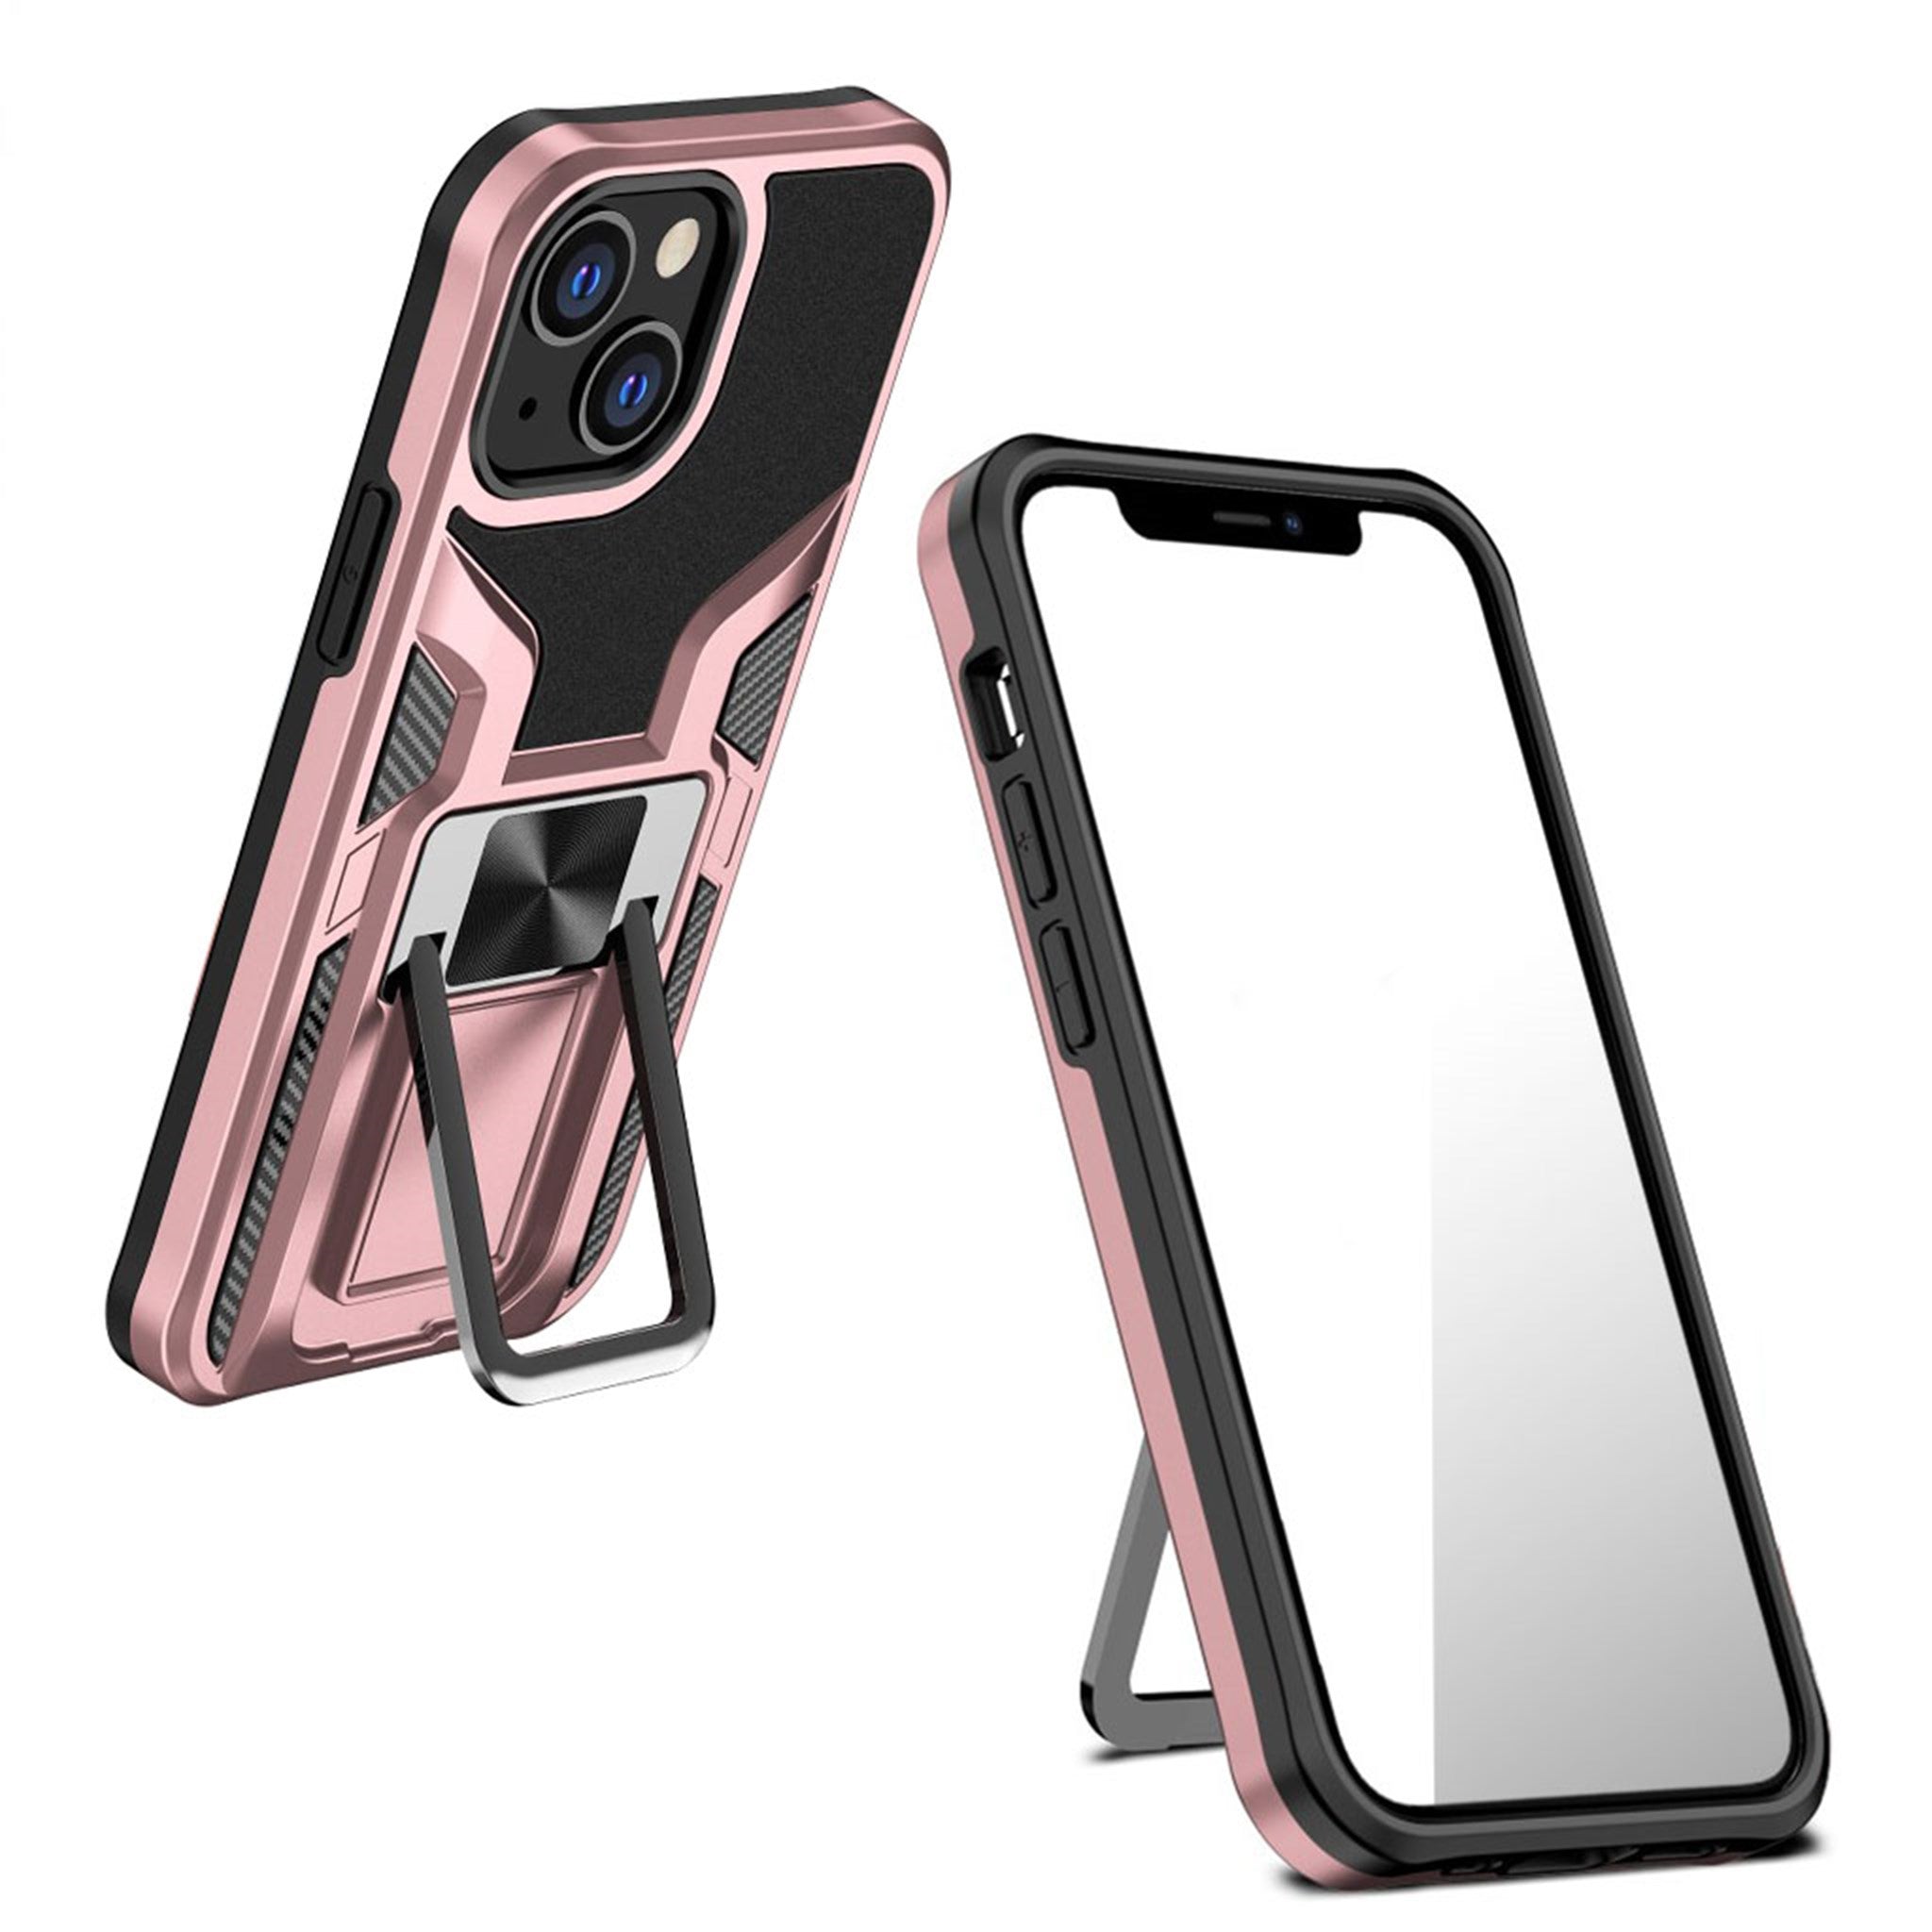 Shockproof hybrid cover with kickstand for iPhone 13 Mini - Rose Gold